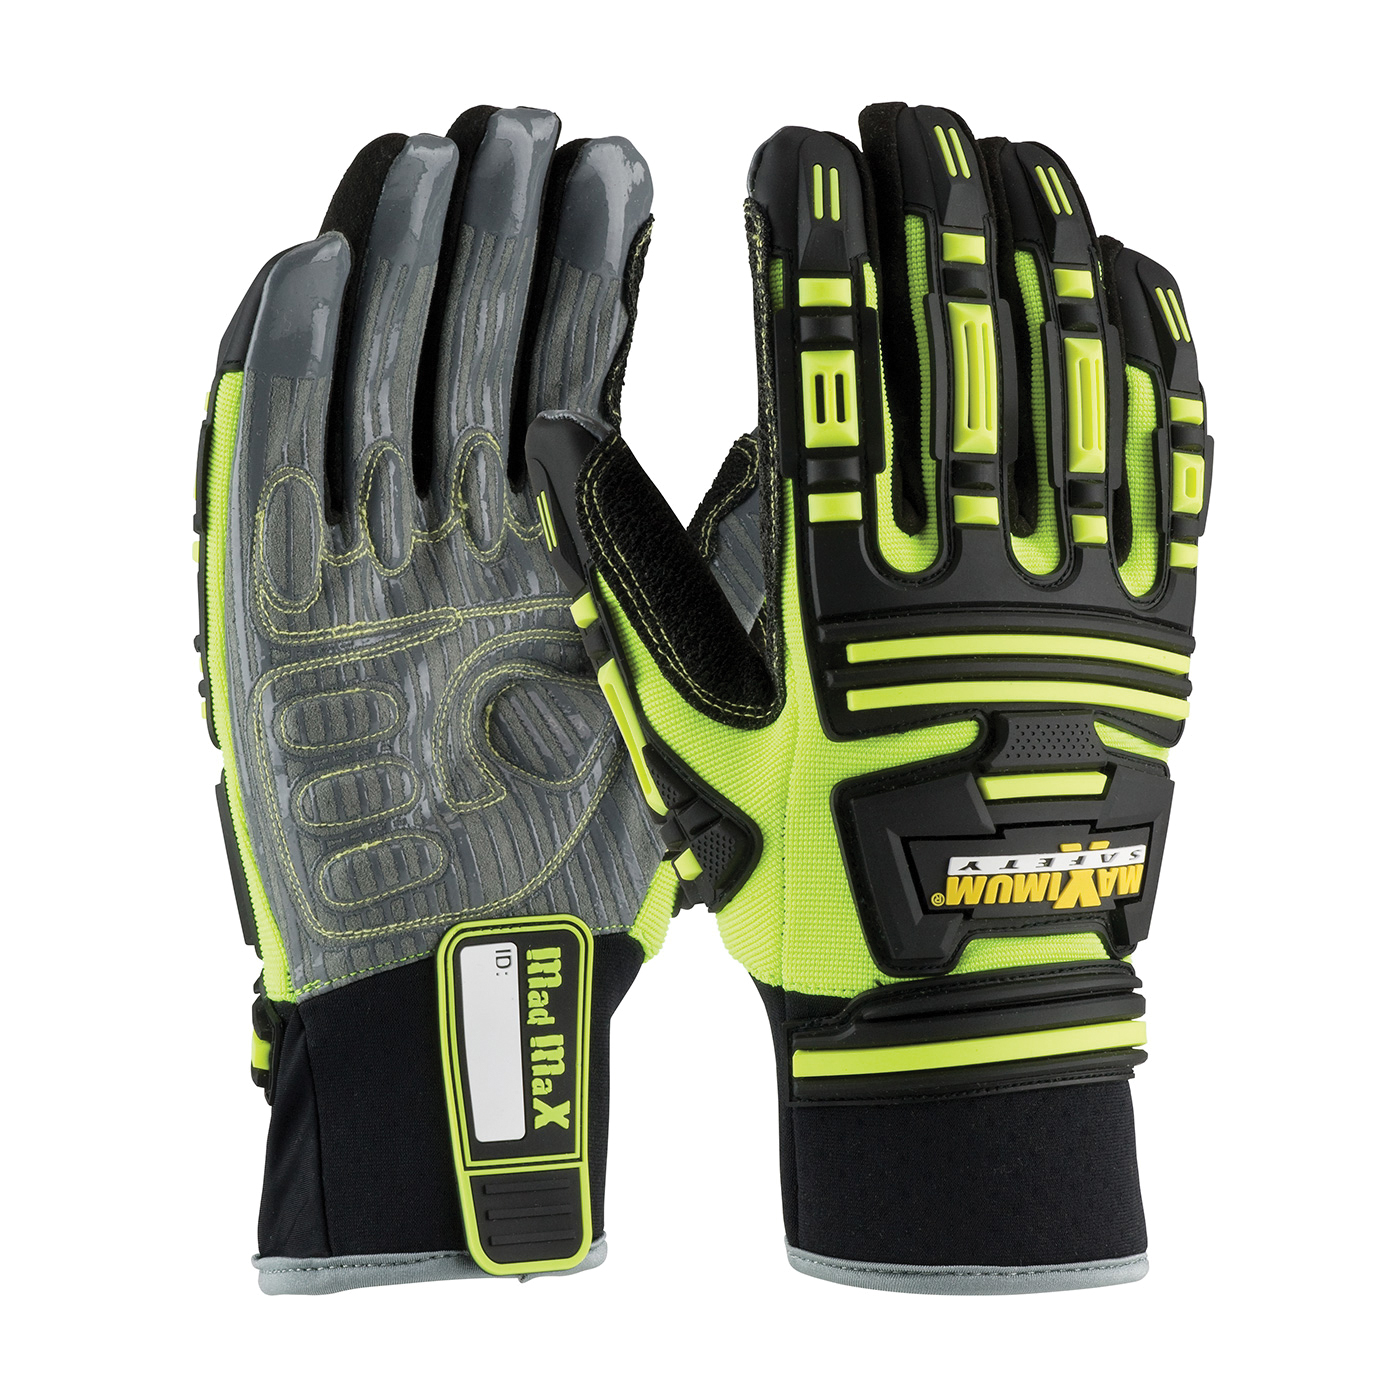 PIP MadMax II Synthetic Leather Palm Mechanics Gloves with TPR Padding